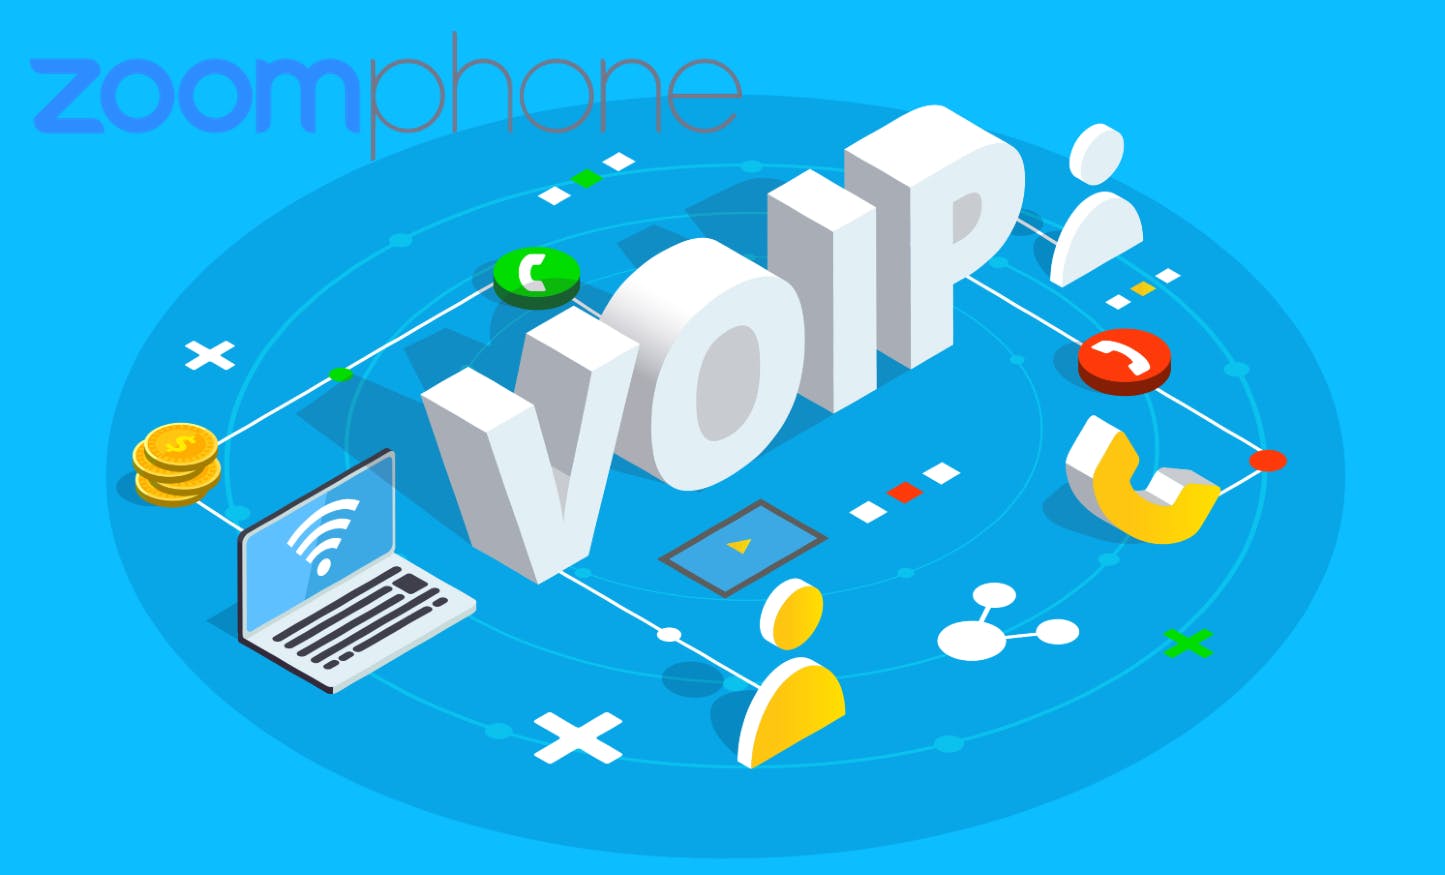 Zoom Phone: Zoom's Cloud-Based VoIP System Review